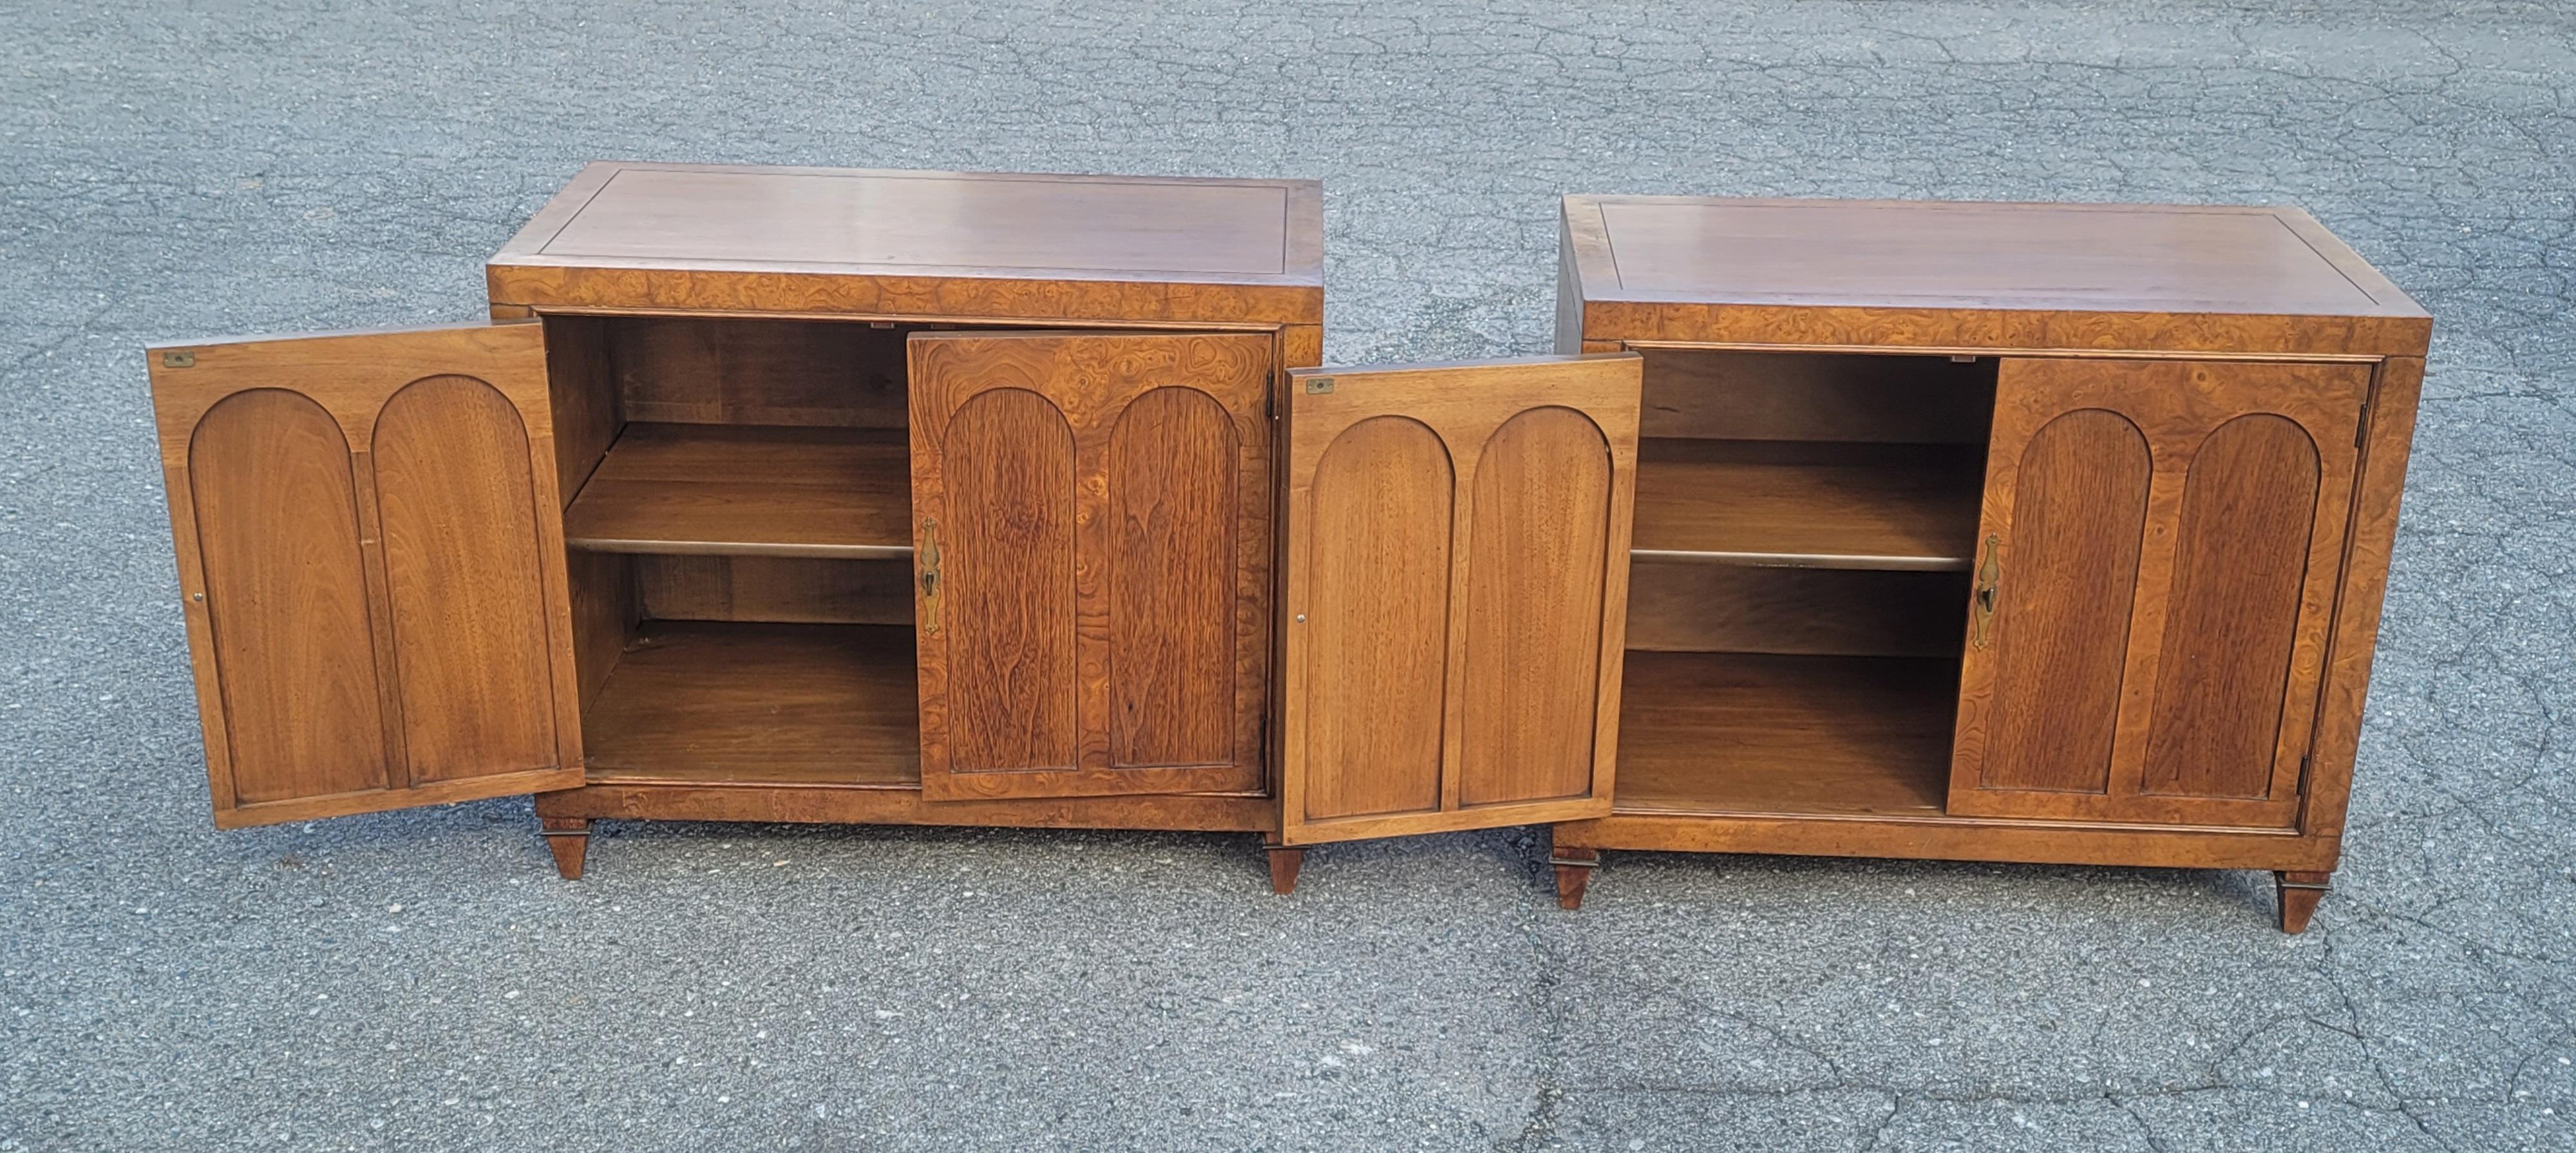 Pair of Mastercraft Burled and Walnut Colonnade Cabinets Credenza Buffet Server For Sale 2